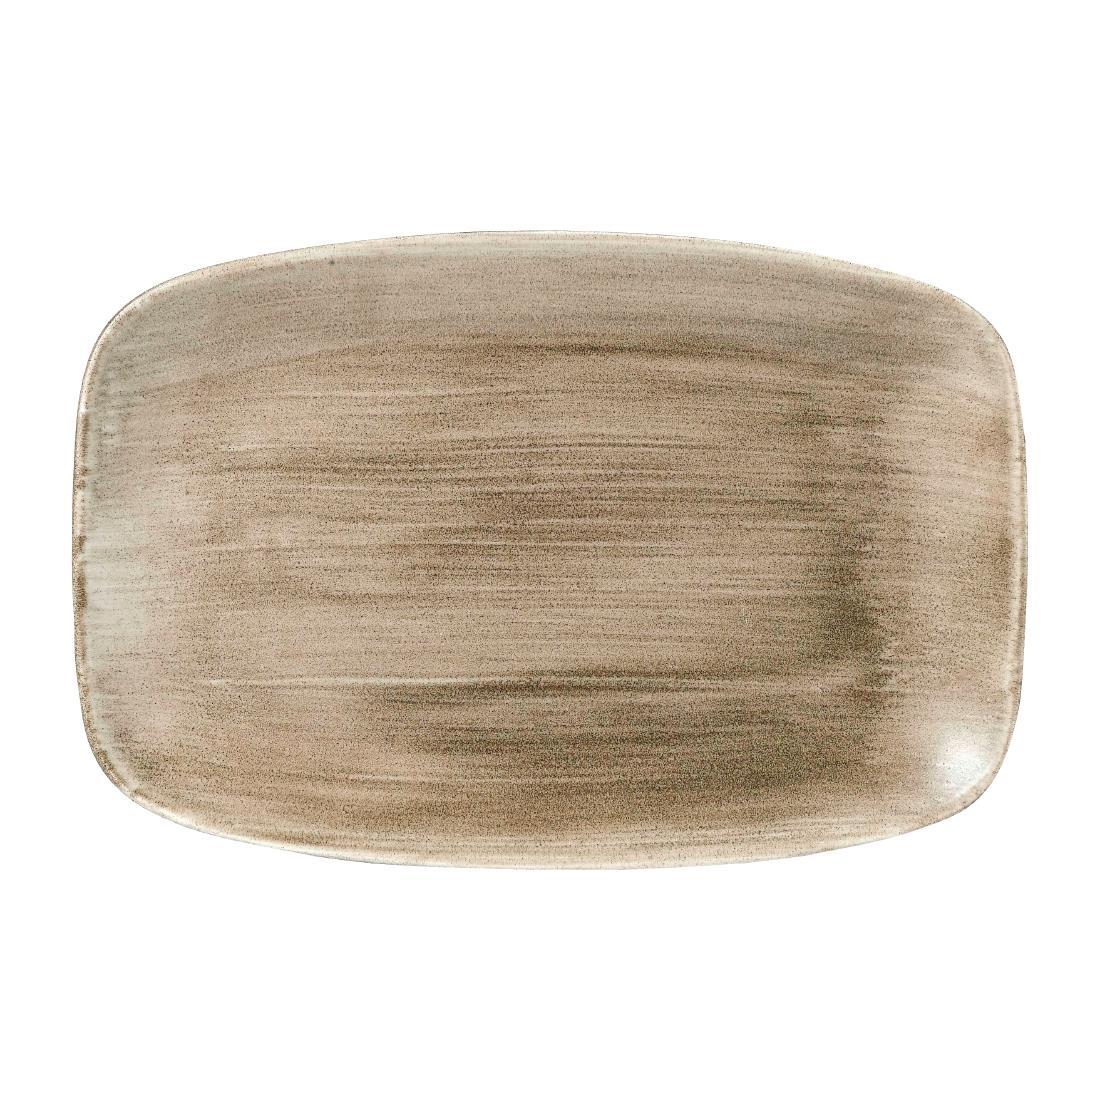 Churchill Stonecast Patina Oblong Plates Antique Taupe 305x198mm (Pack of 6) - FD862  - 1